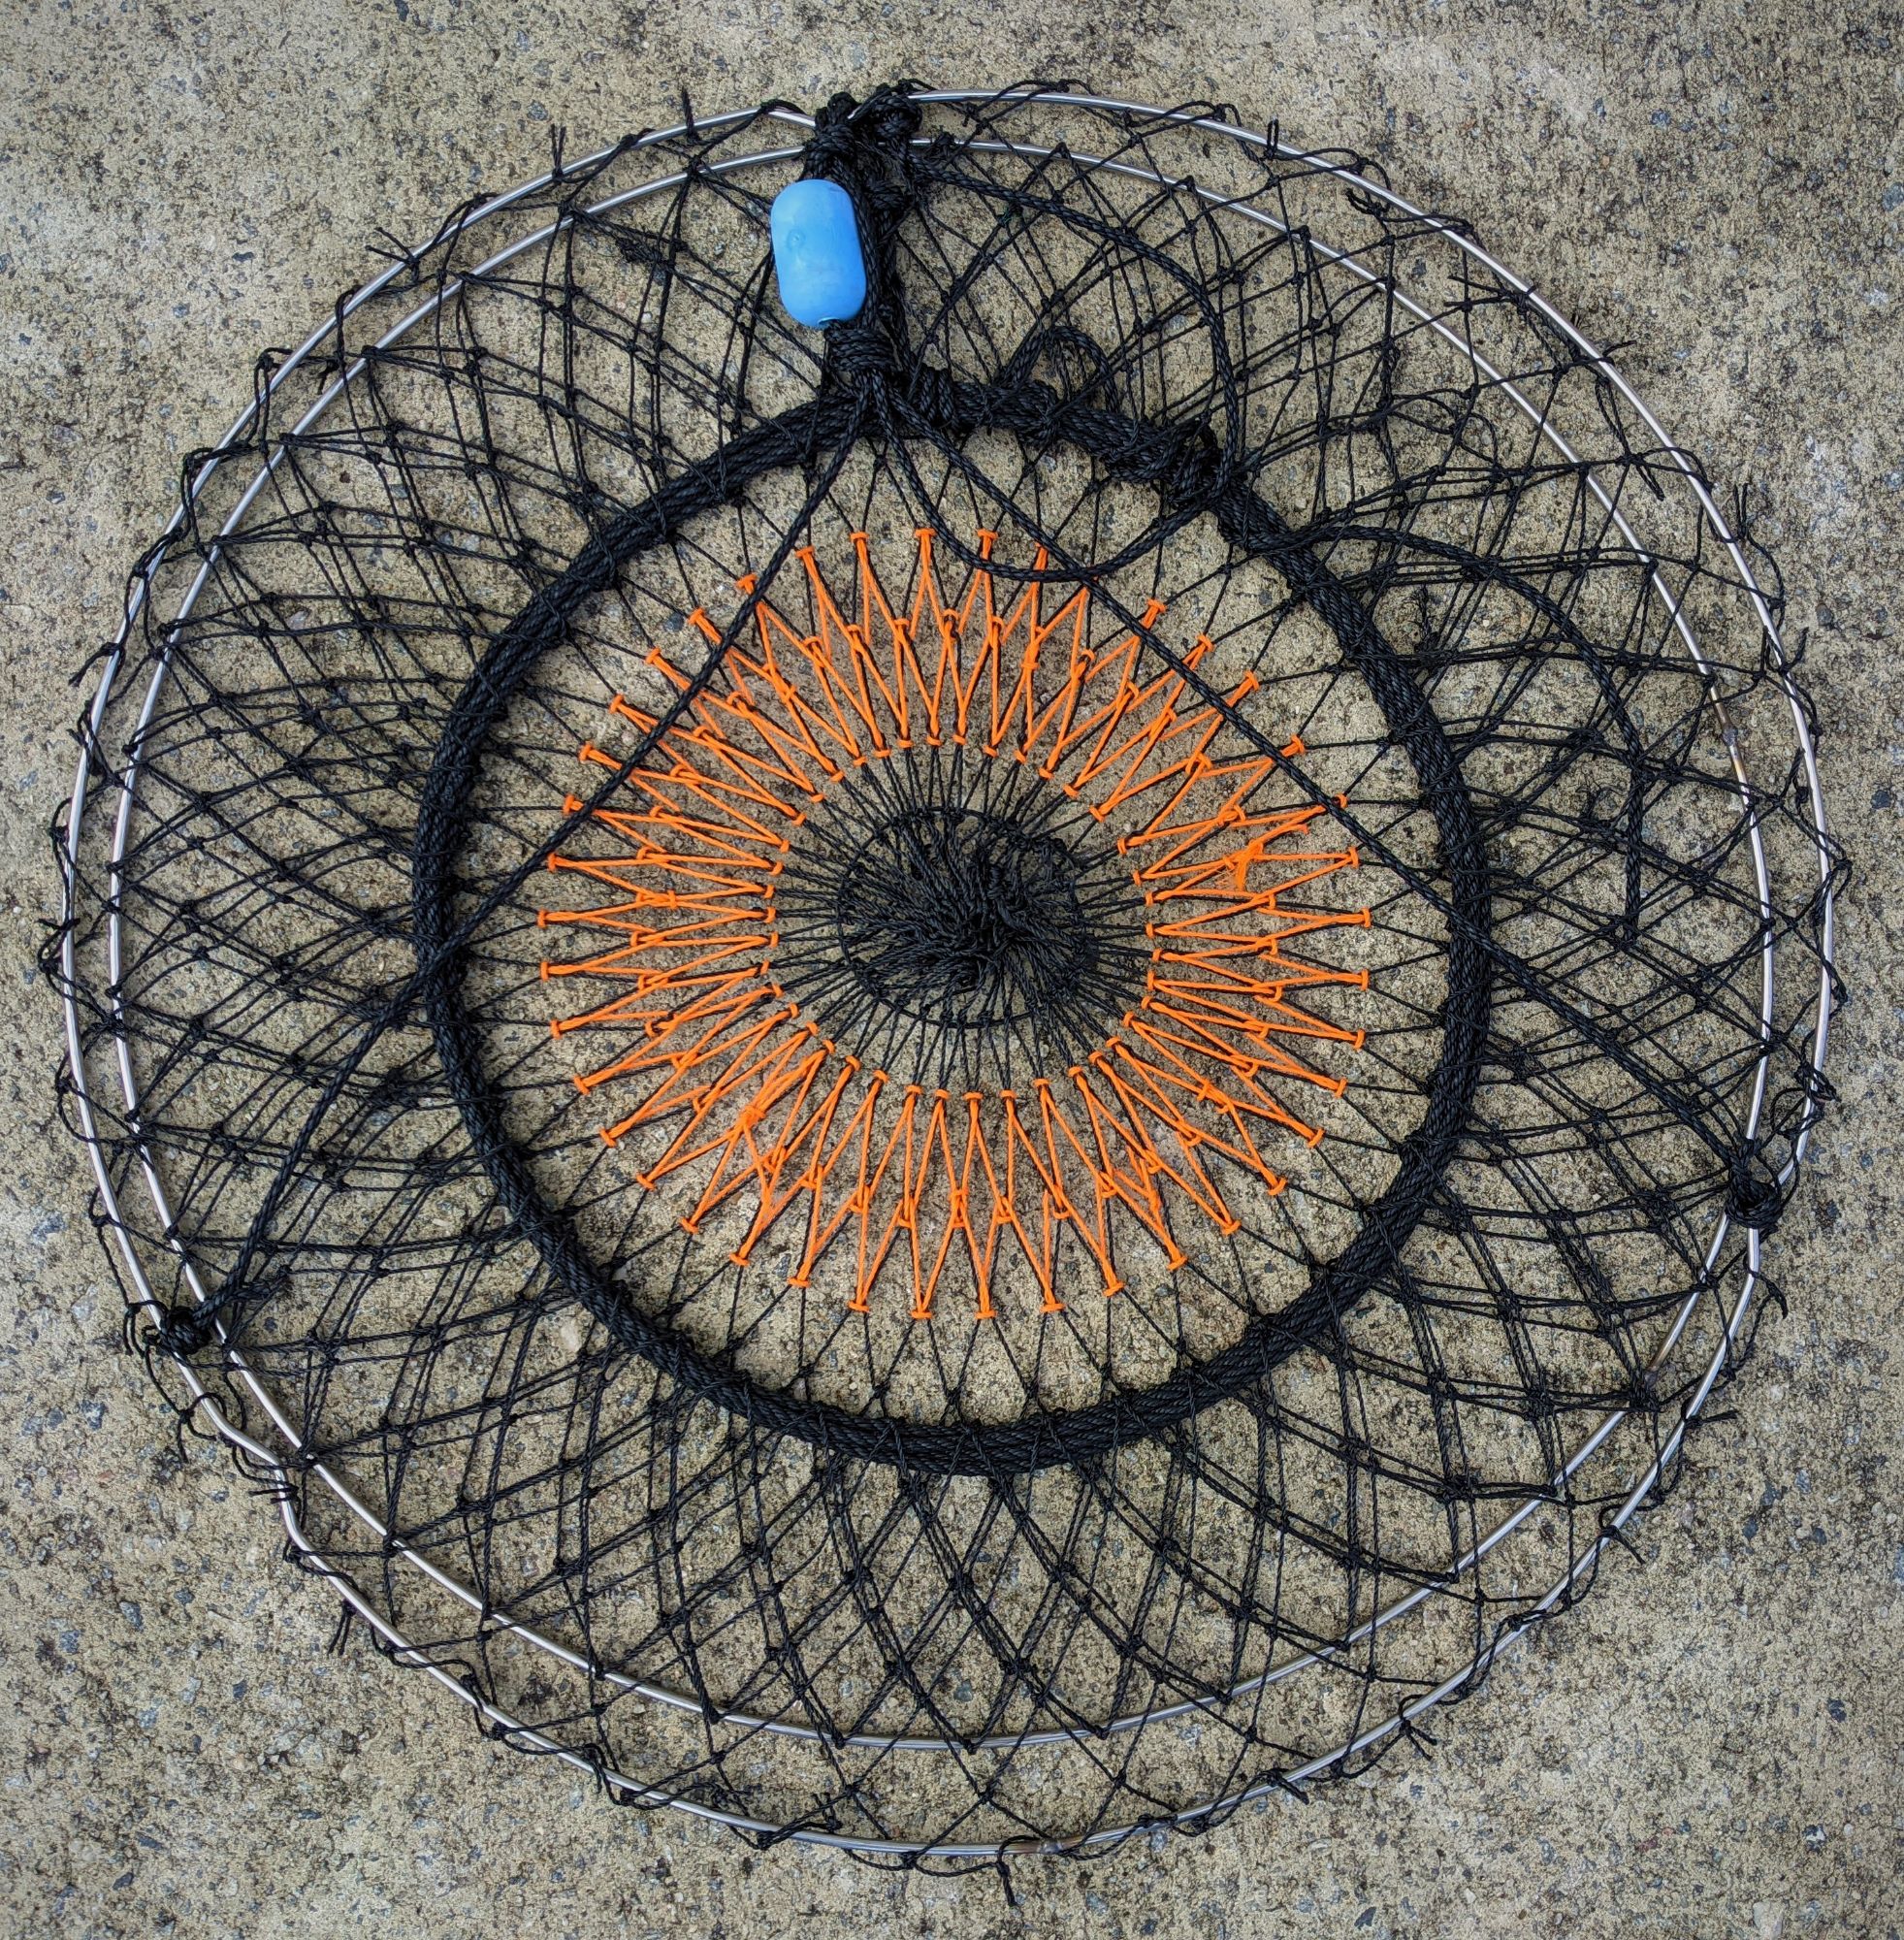 75cm Stainless Steel Crab Nets with luminous eye For Sale Perth